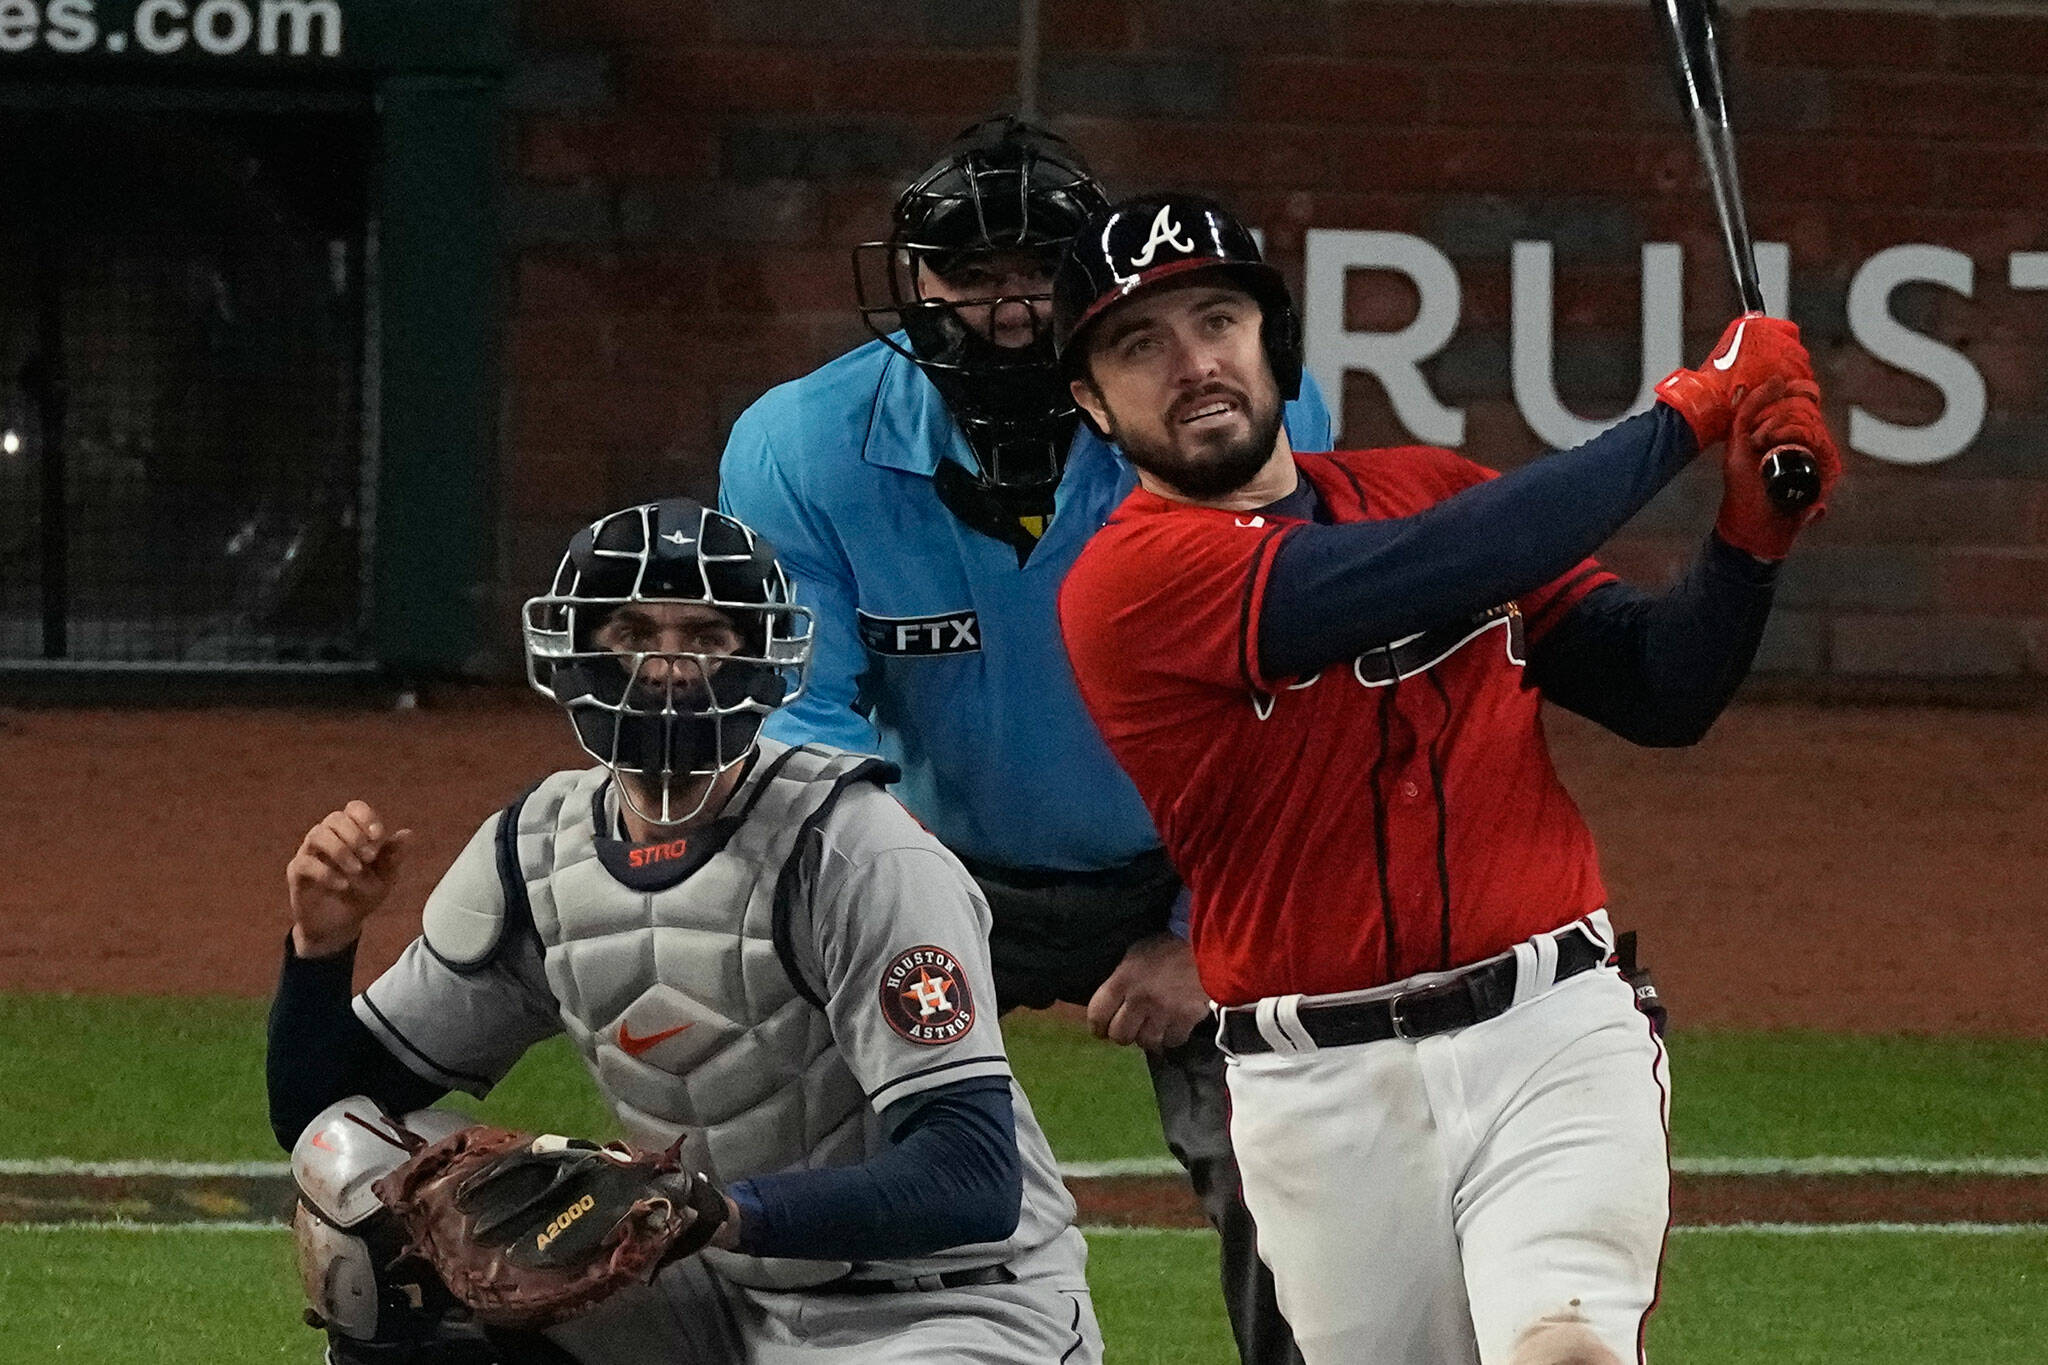 The Braves’ Travis d’Arnaud watches his home run during the eighth inning of Game 3 of the World Series against the Astros on Oct. 29, 2021, in Atlanta. (AP Photo/John Bazemore)